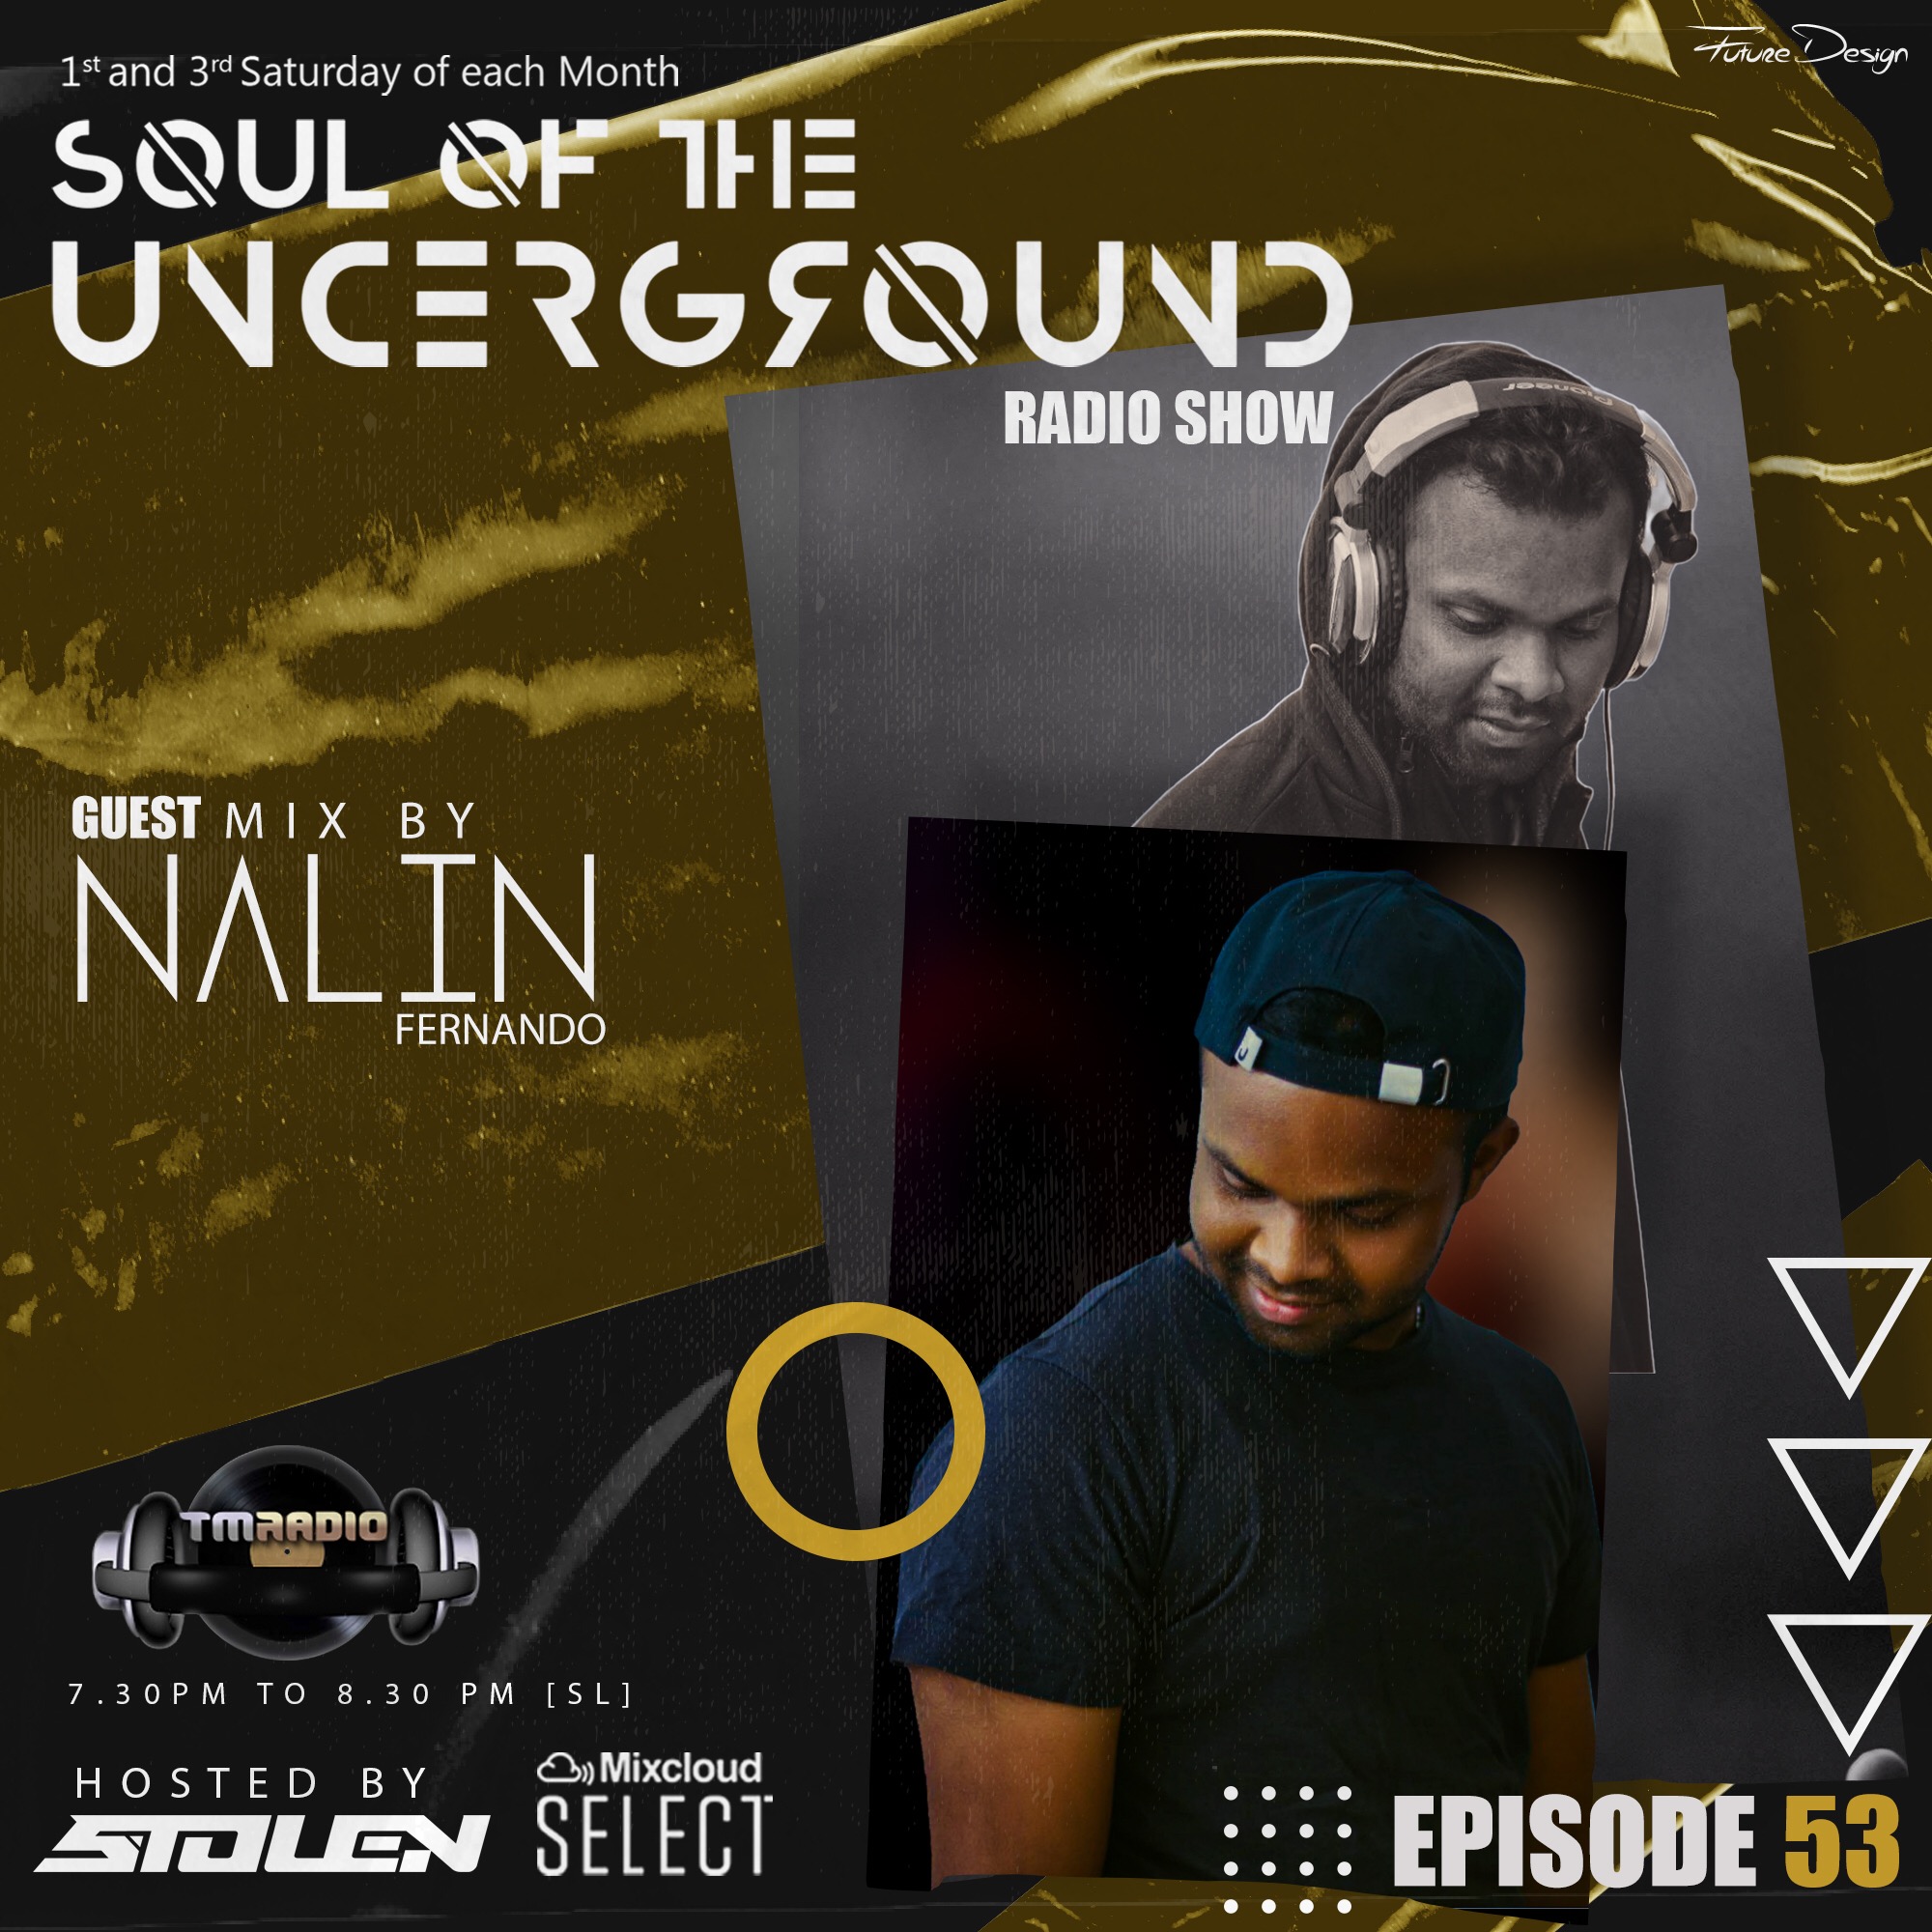 Soul of the Underground :: Episode 053 Guest mix by Nalin Fernando (aired on July 16th) banner logo